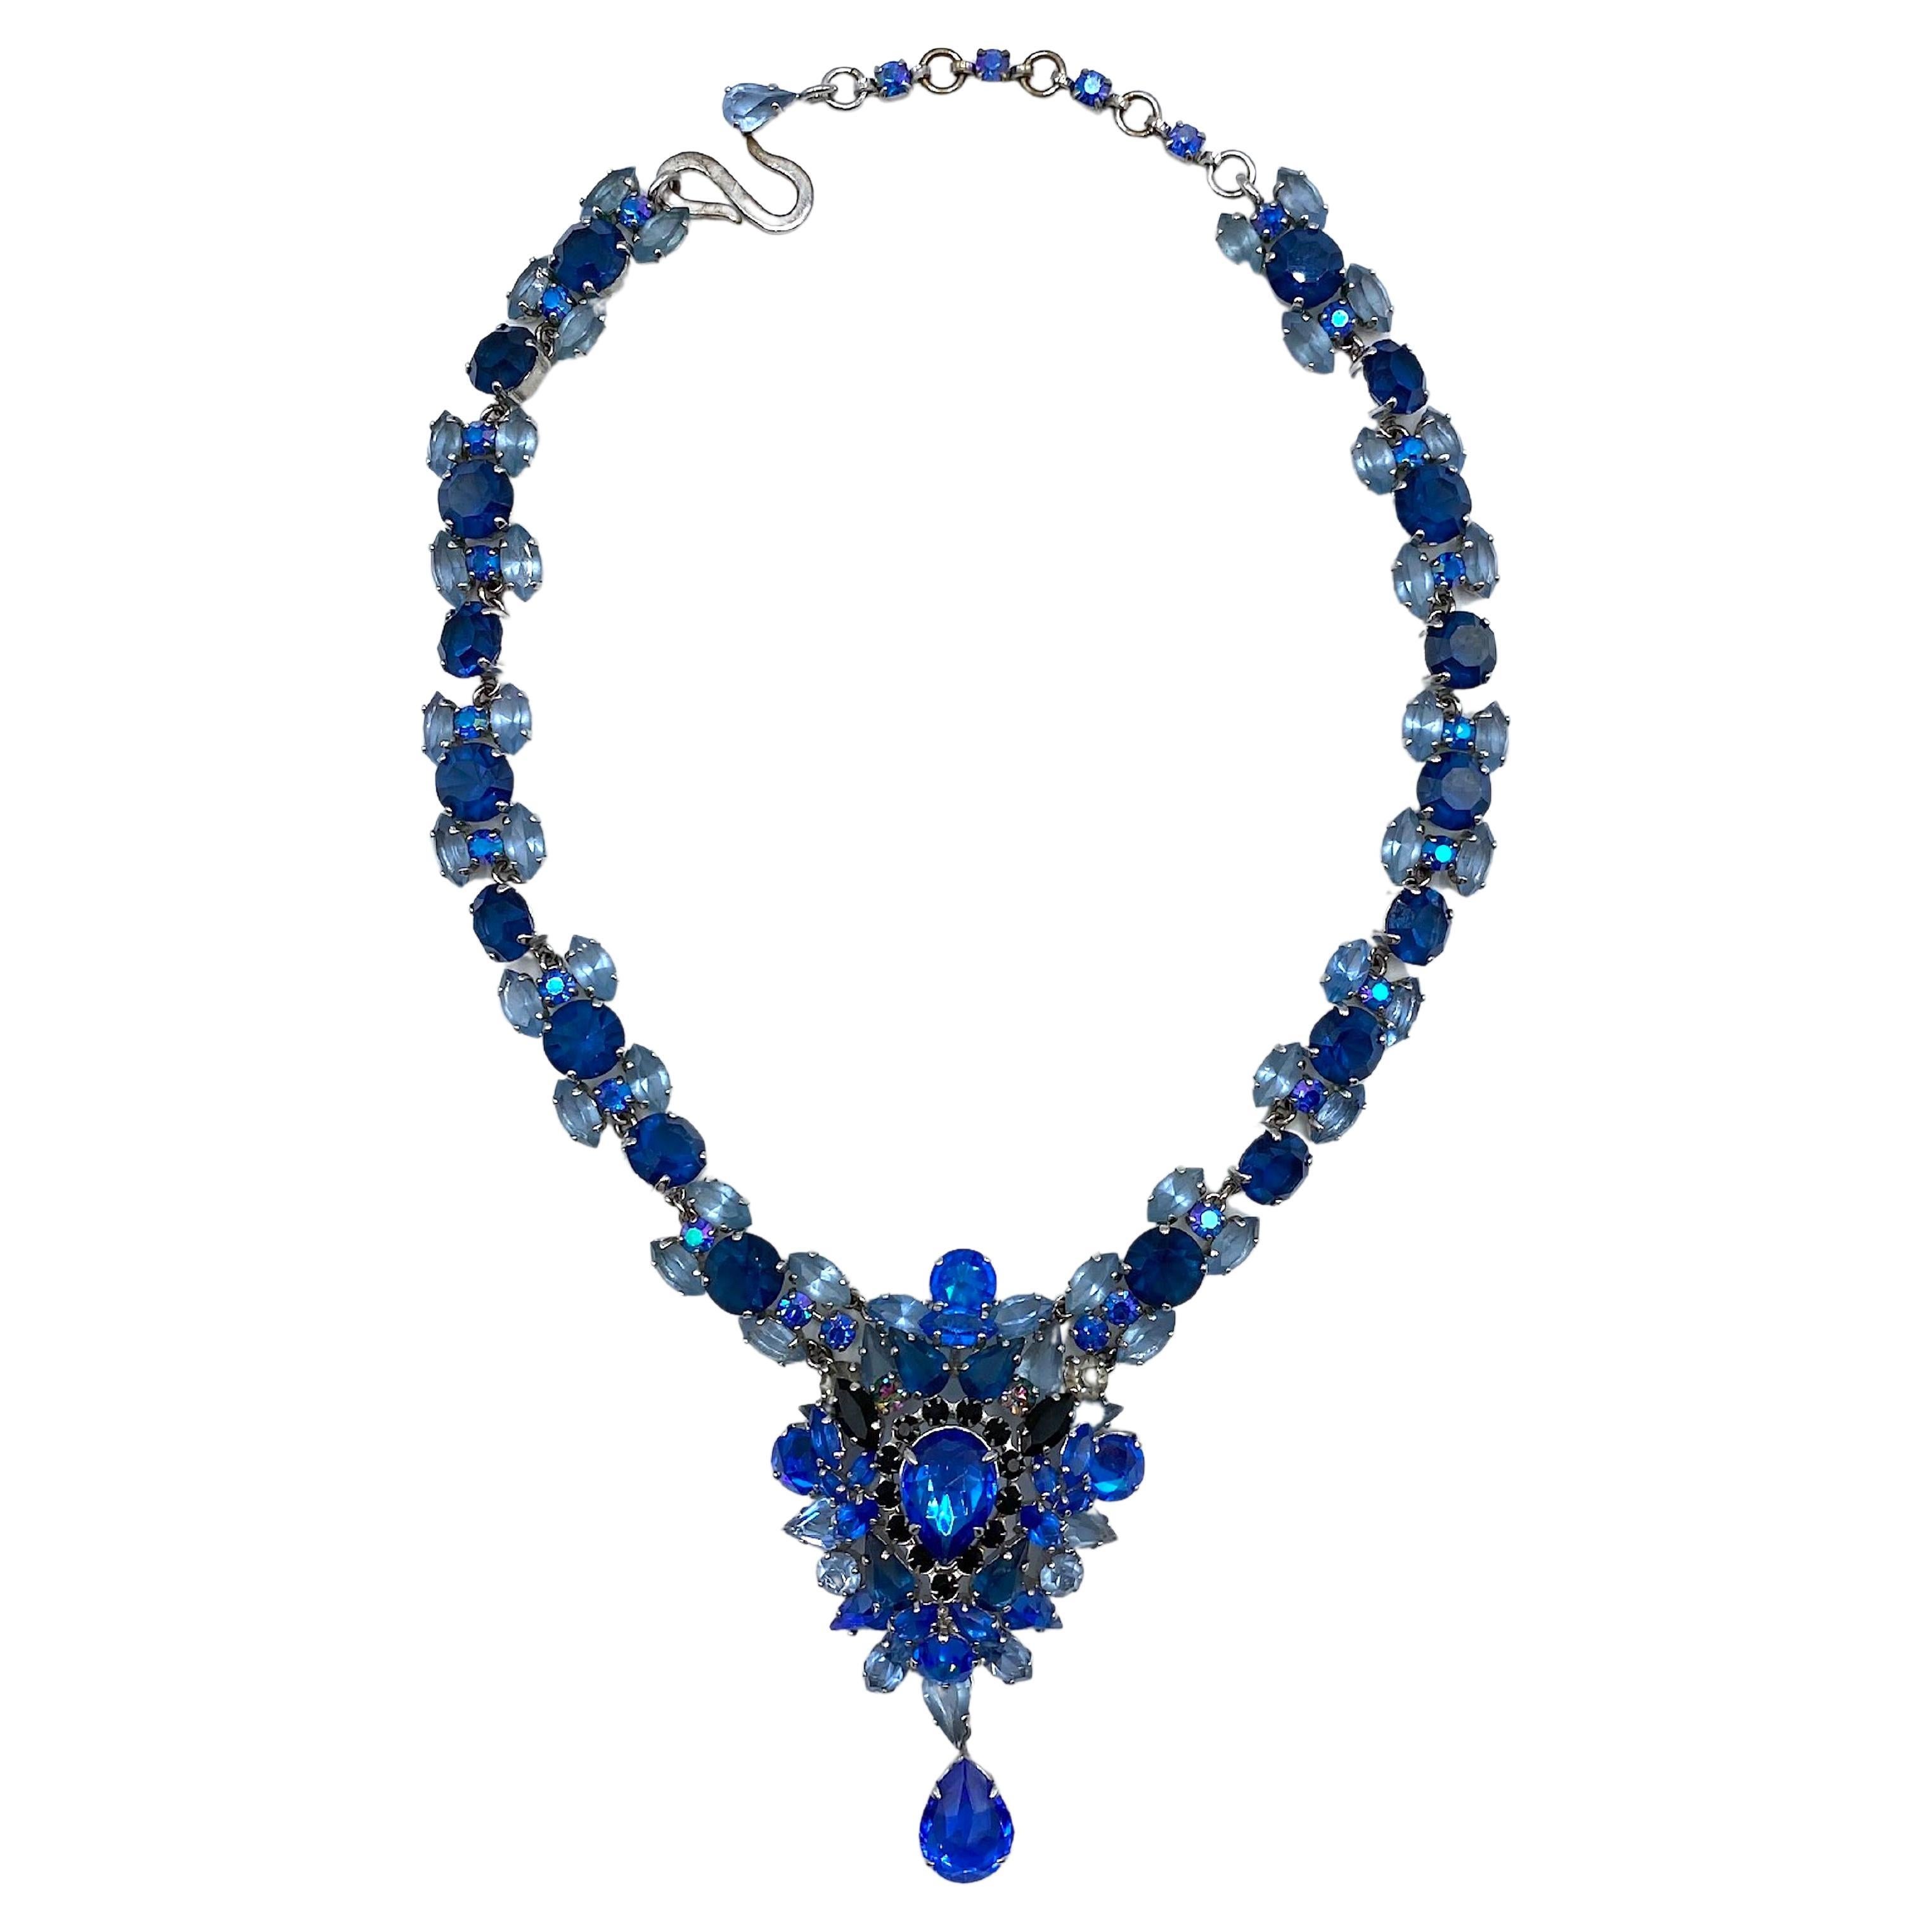 A stunning and rare Christian Dior necklace produced in 1959 by Henkel and Grosse' of Germany and attributed to designer Michaell Maer for Dior. He was noted for his use of many shades of blute stones in his Dior jewelry. The necklace is rhodium